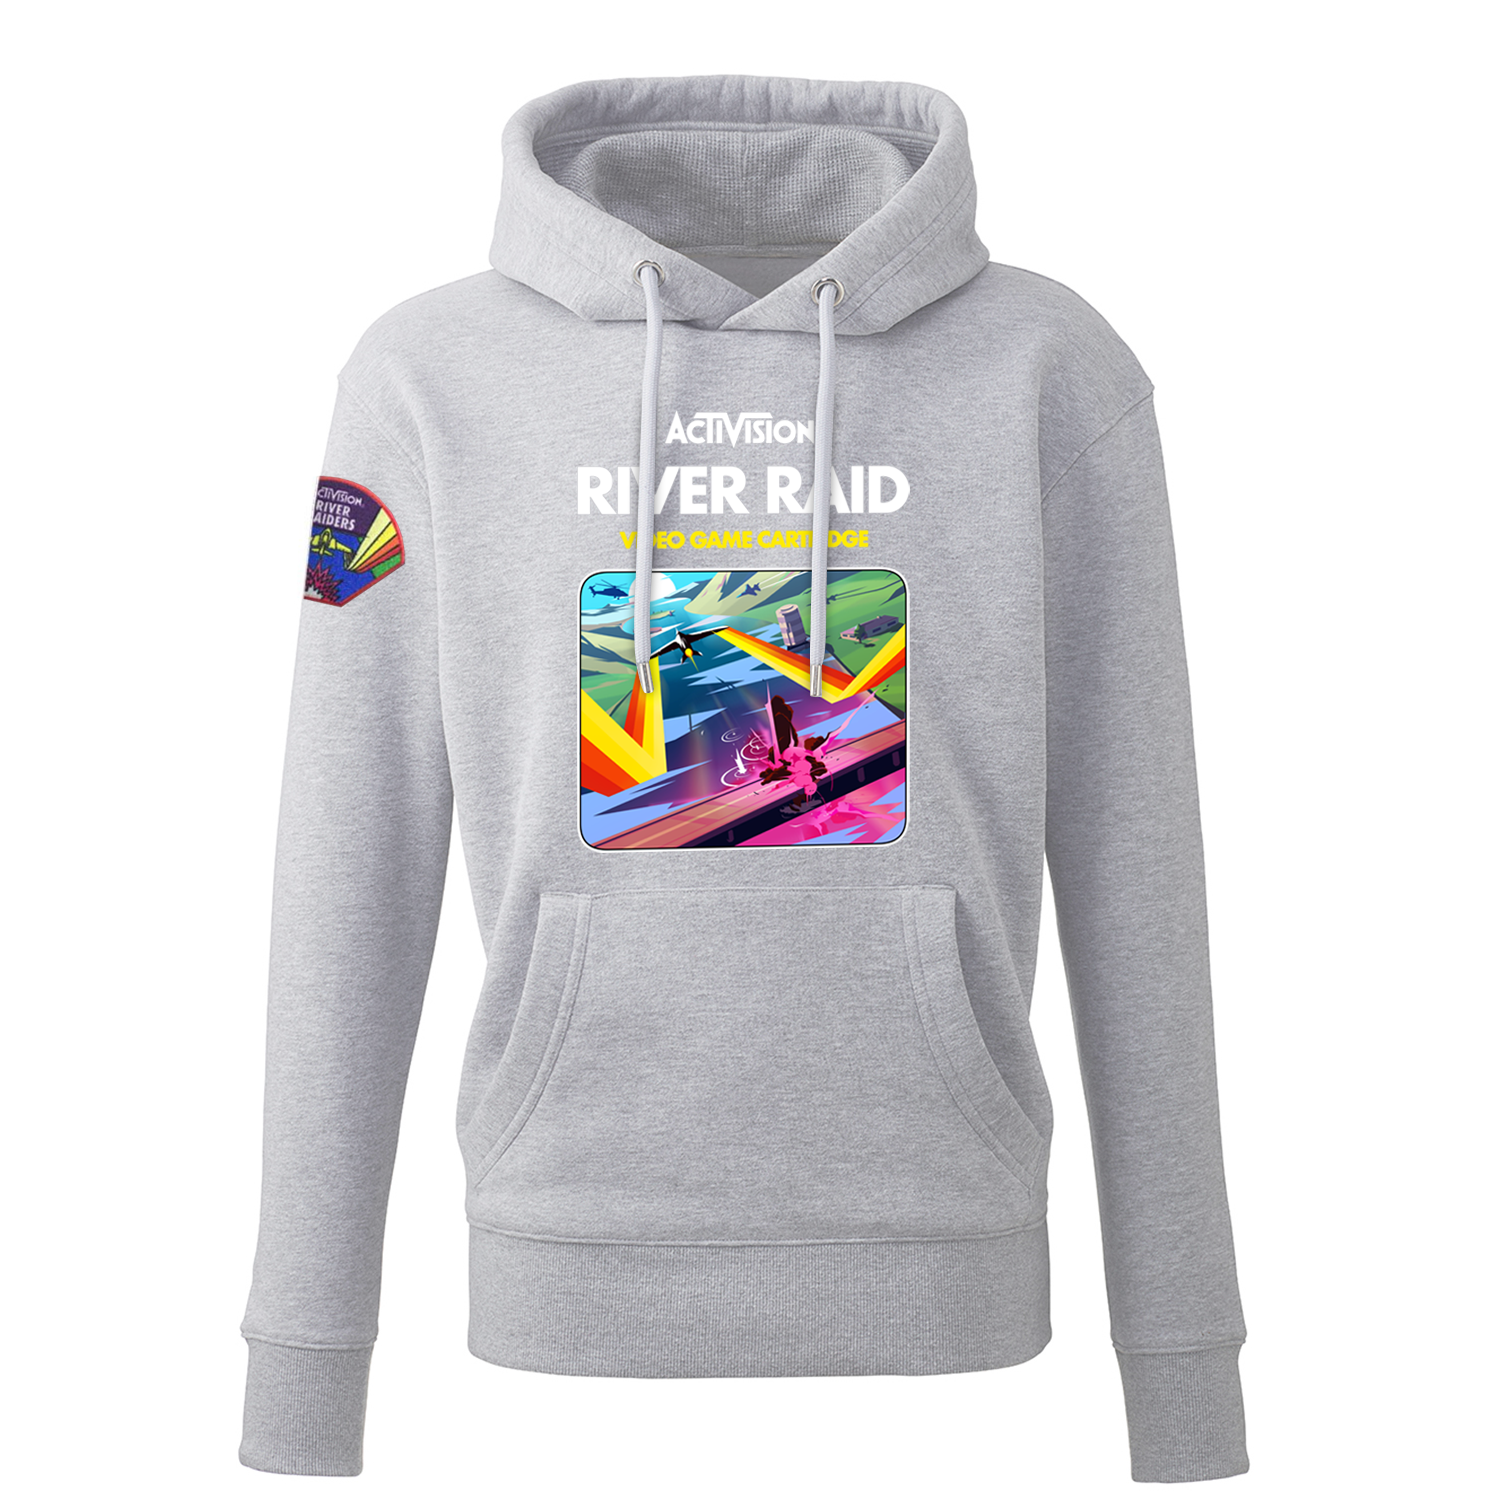 River Raid Unisex Hoodie, Activision Cartridge Design on Grey Loose Fit Pullover with Kangaroo Pouch